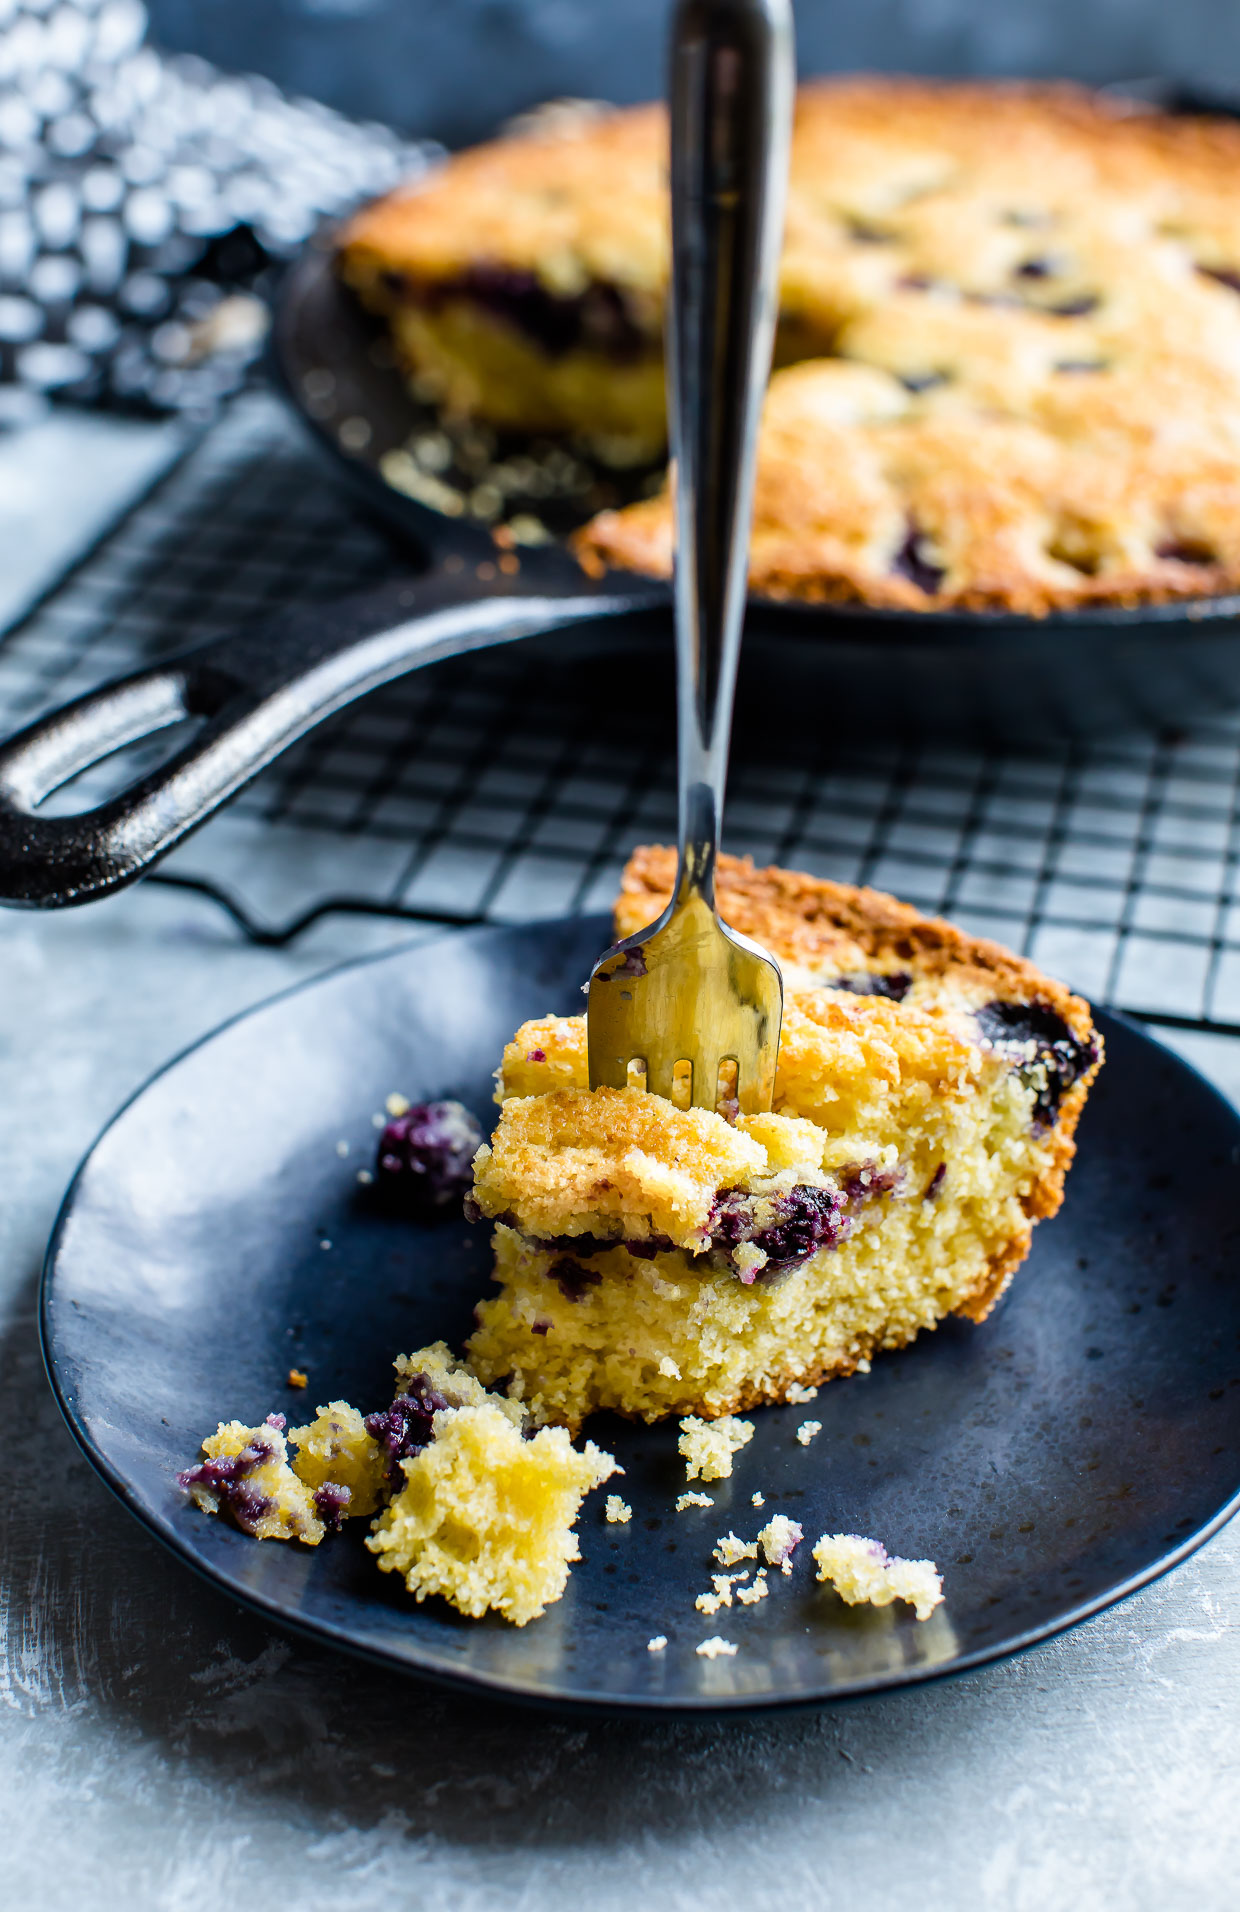 Sweet Blueberry Cornbread Skillet with Cinnamon Honey Butter kissed with savory sweetness and baked to fluffy perfection. This cast iron skillet cornbread is totally delicious!